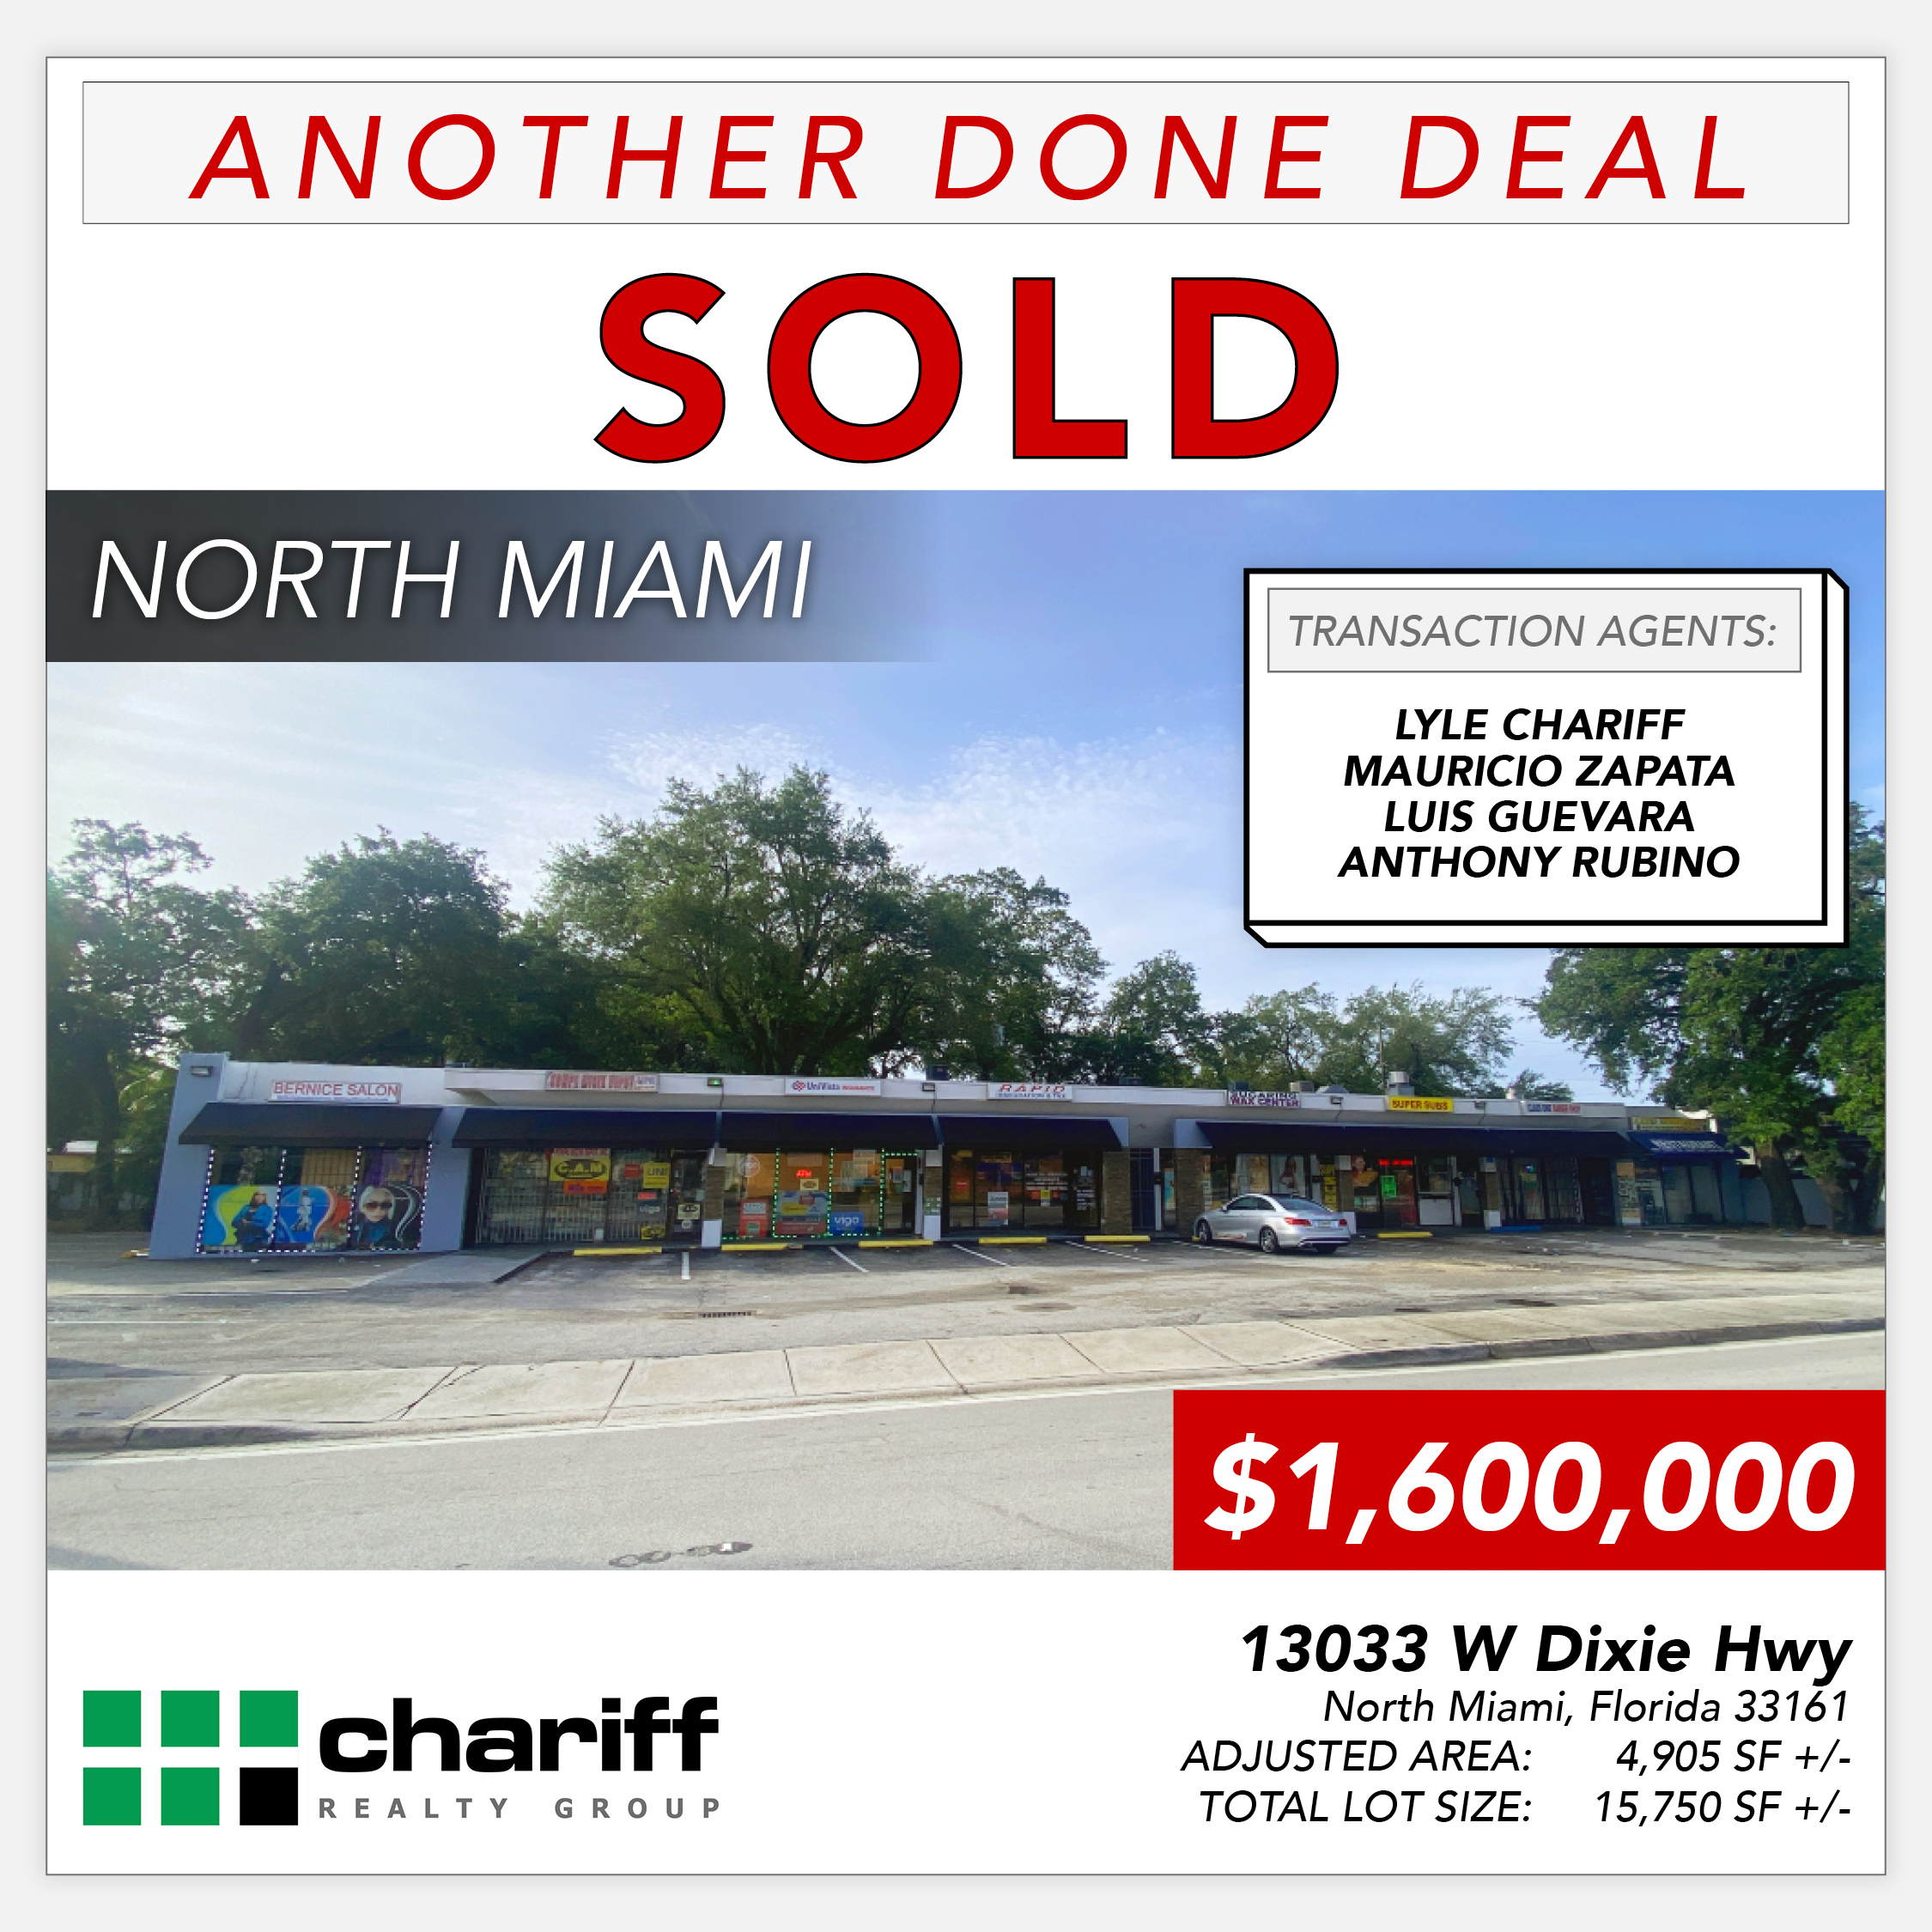 13033 W Dixie Hwy- Another Done Deal-Sold-North Miami - Miami-Florida -33161 -Chariff Realty Group